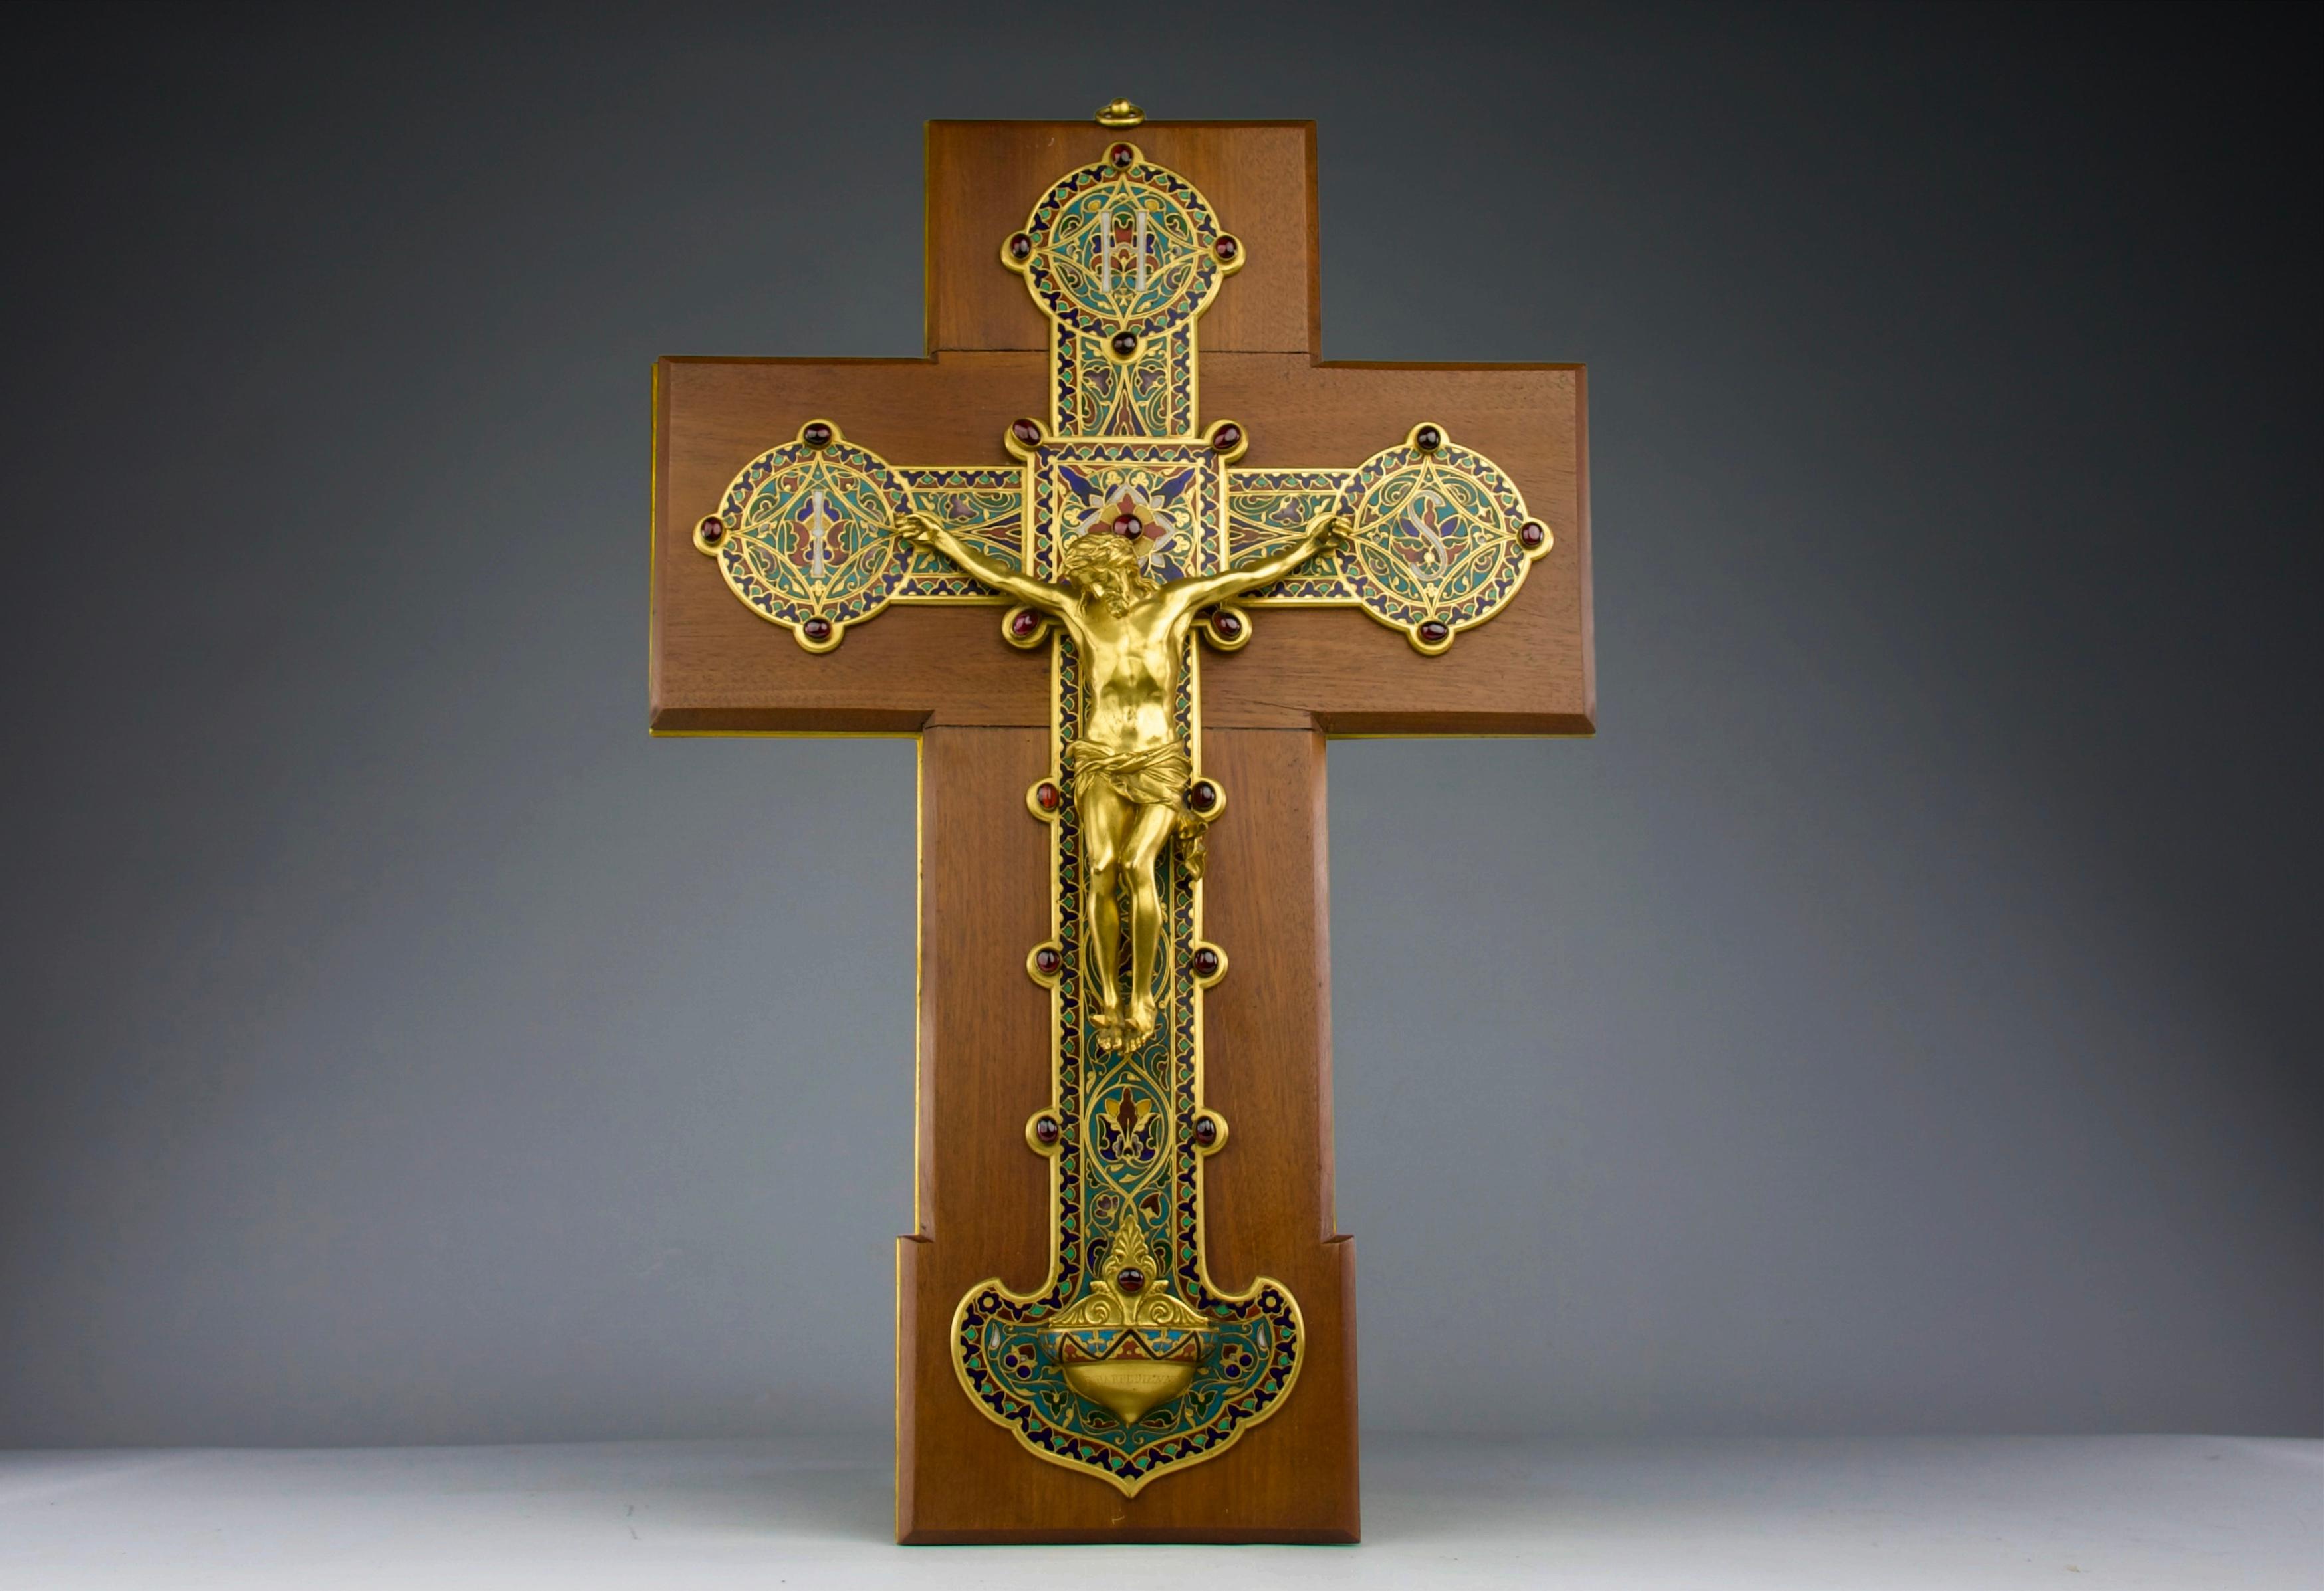 Magnificent antique crucifix representation of Christ on the cross in cloisonné arabesque shaped enamel and gilt bronze by the Ferdinand Barbedienne foundry. On a wood backdrop and a gilt bronze back. Signed F. Barbedienne. France 19th century.

In